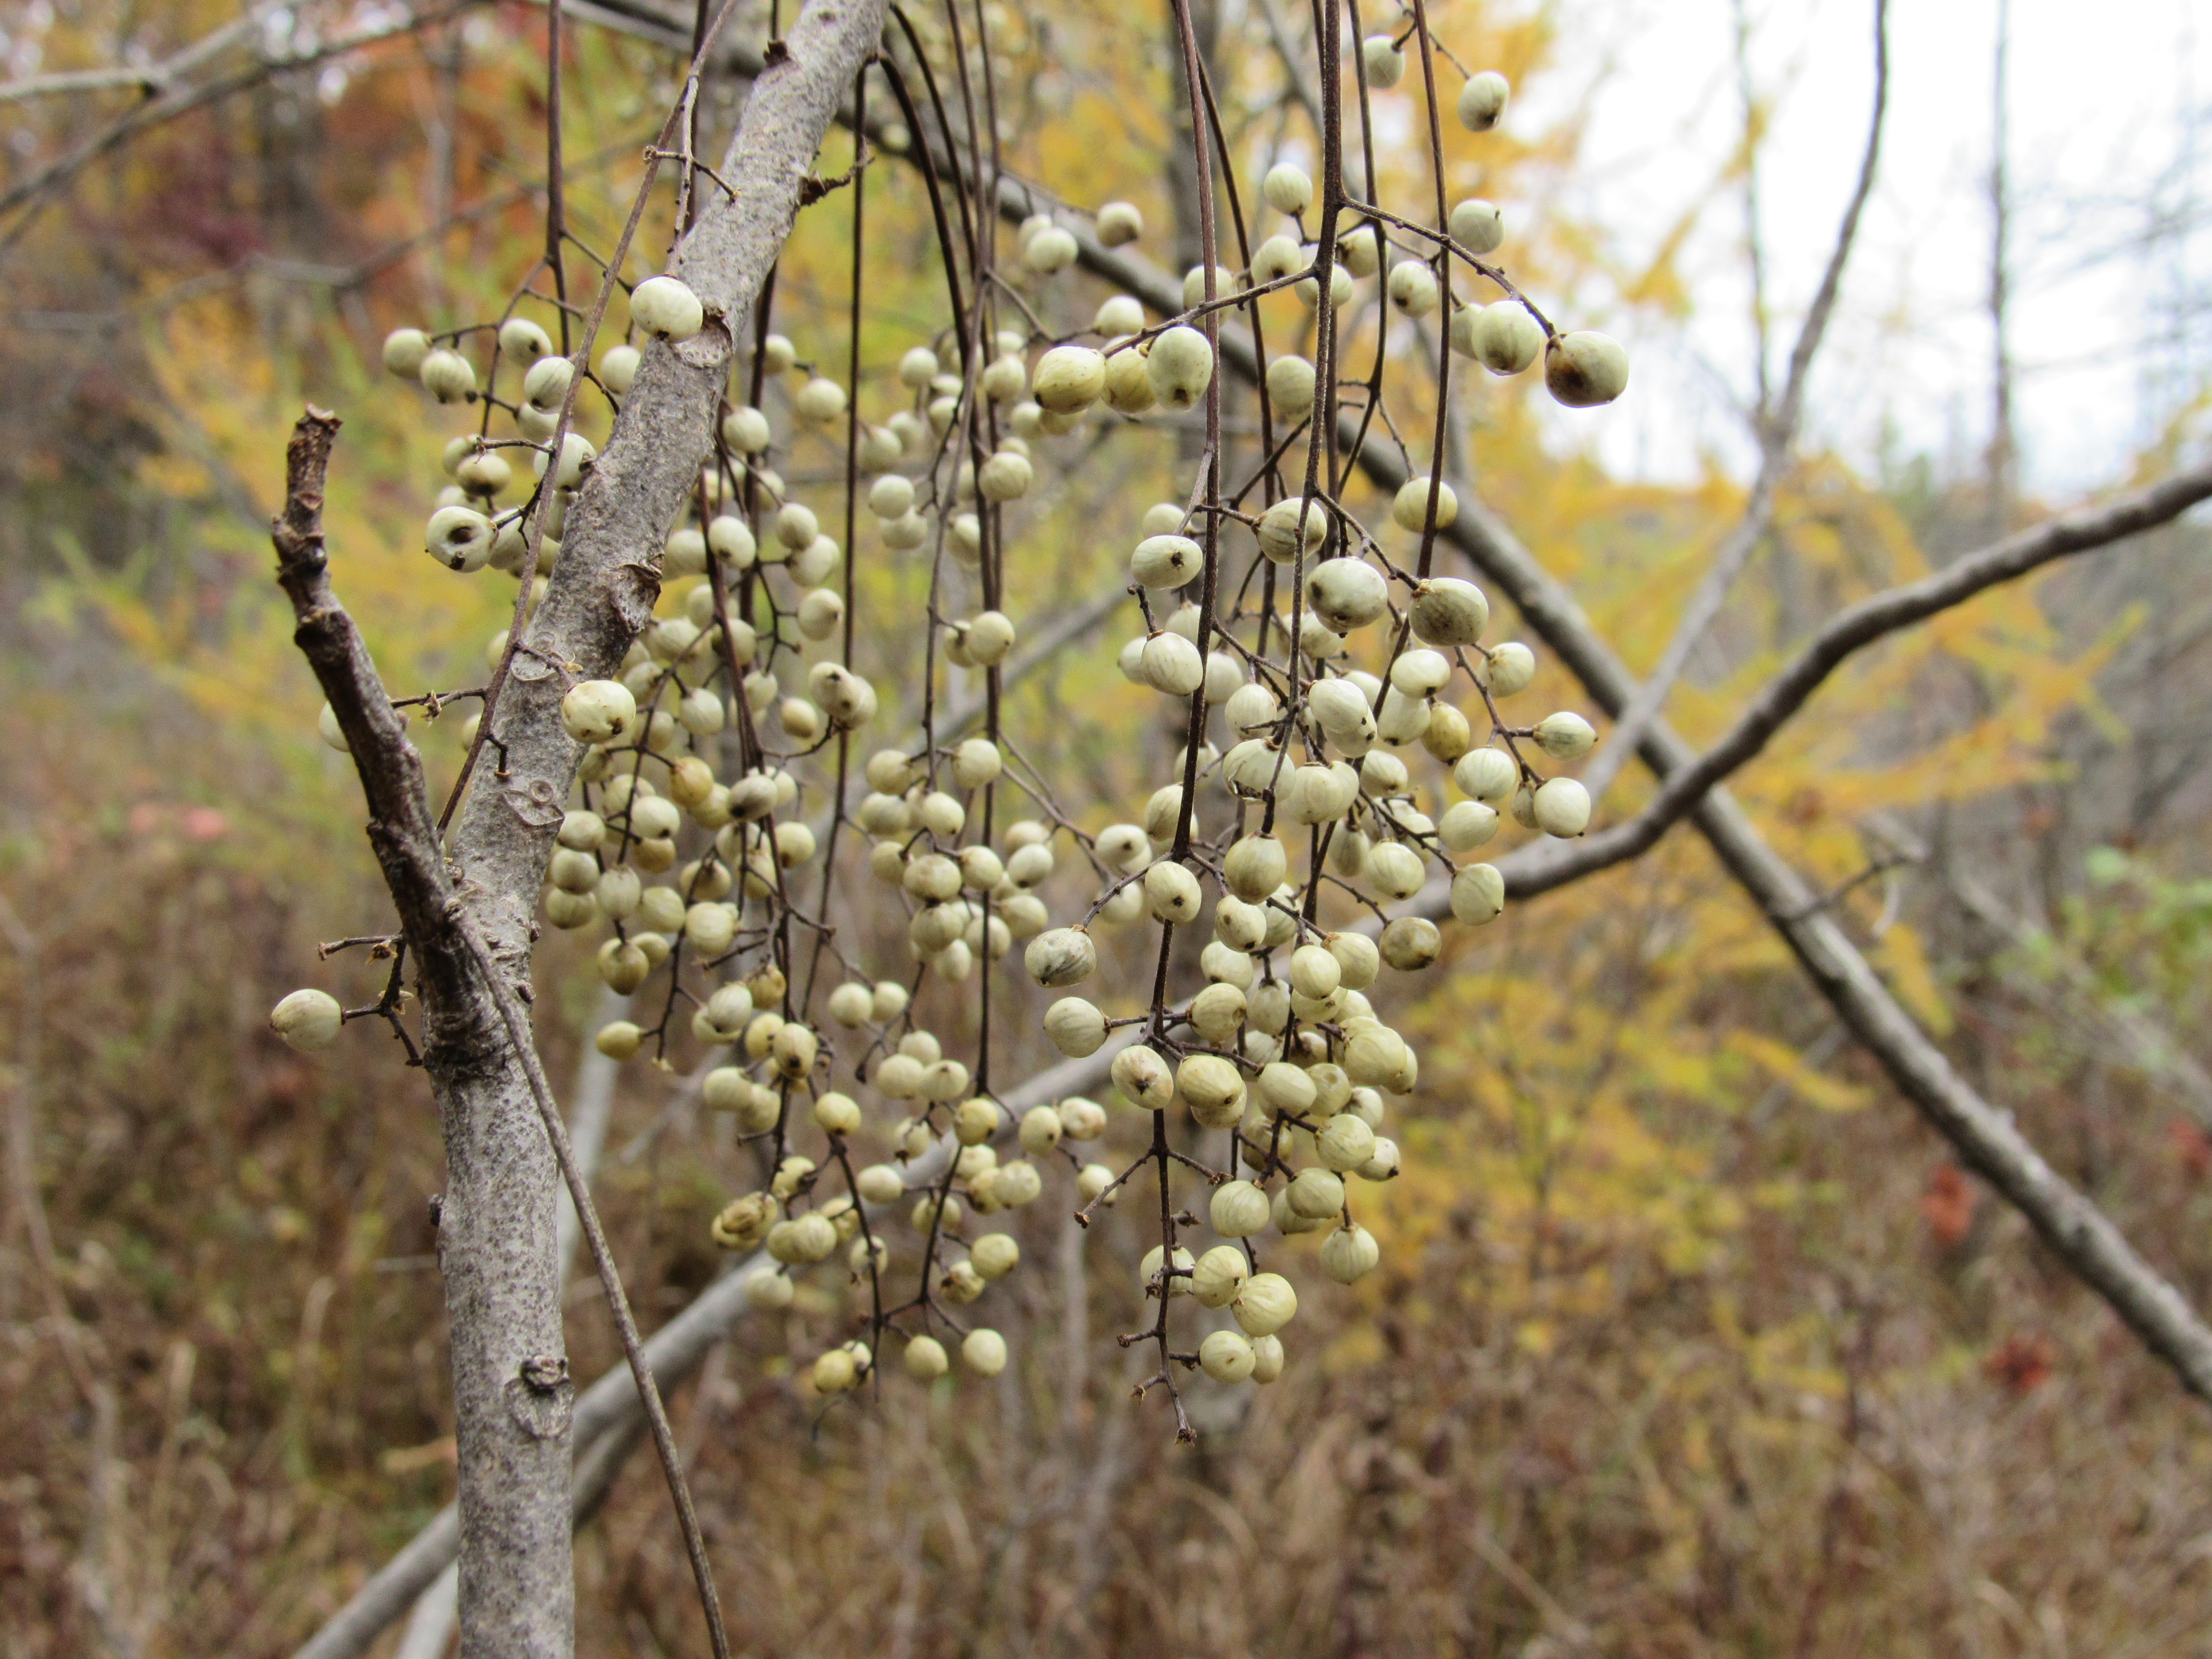 Whitish-gray poison ivy berries among branches.